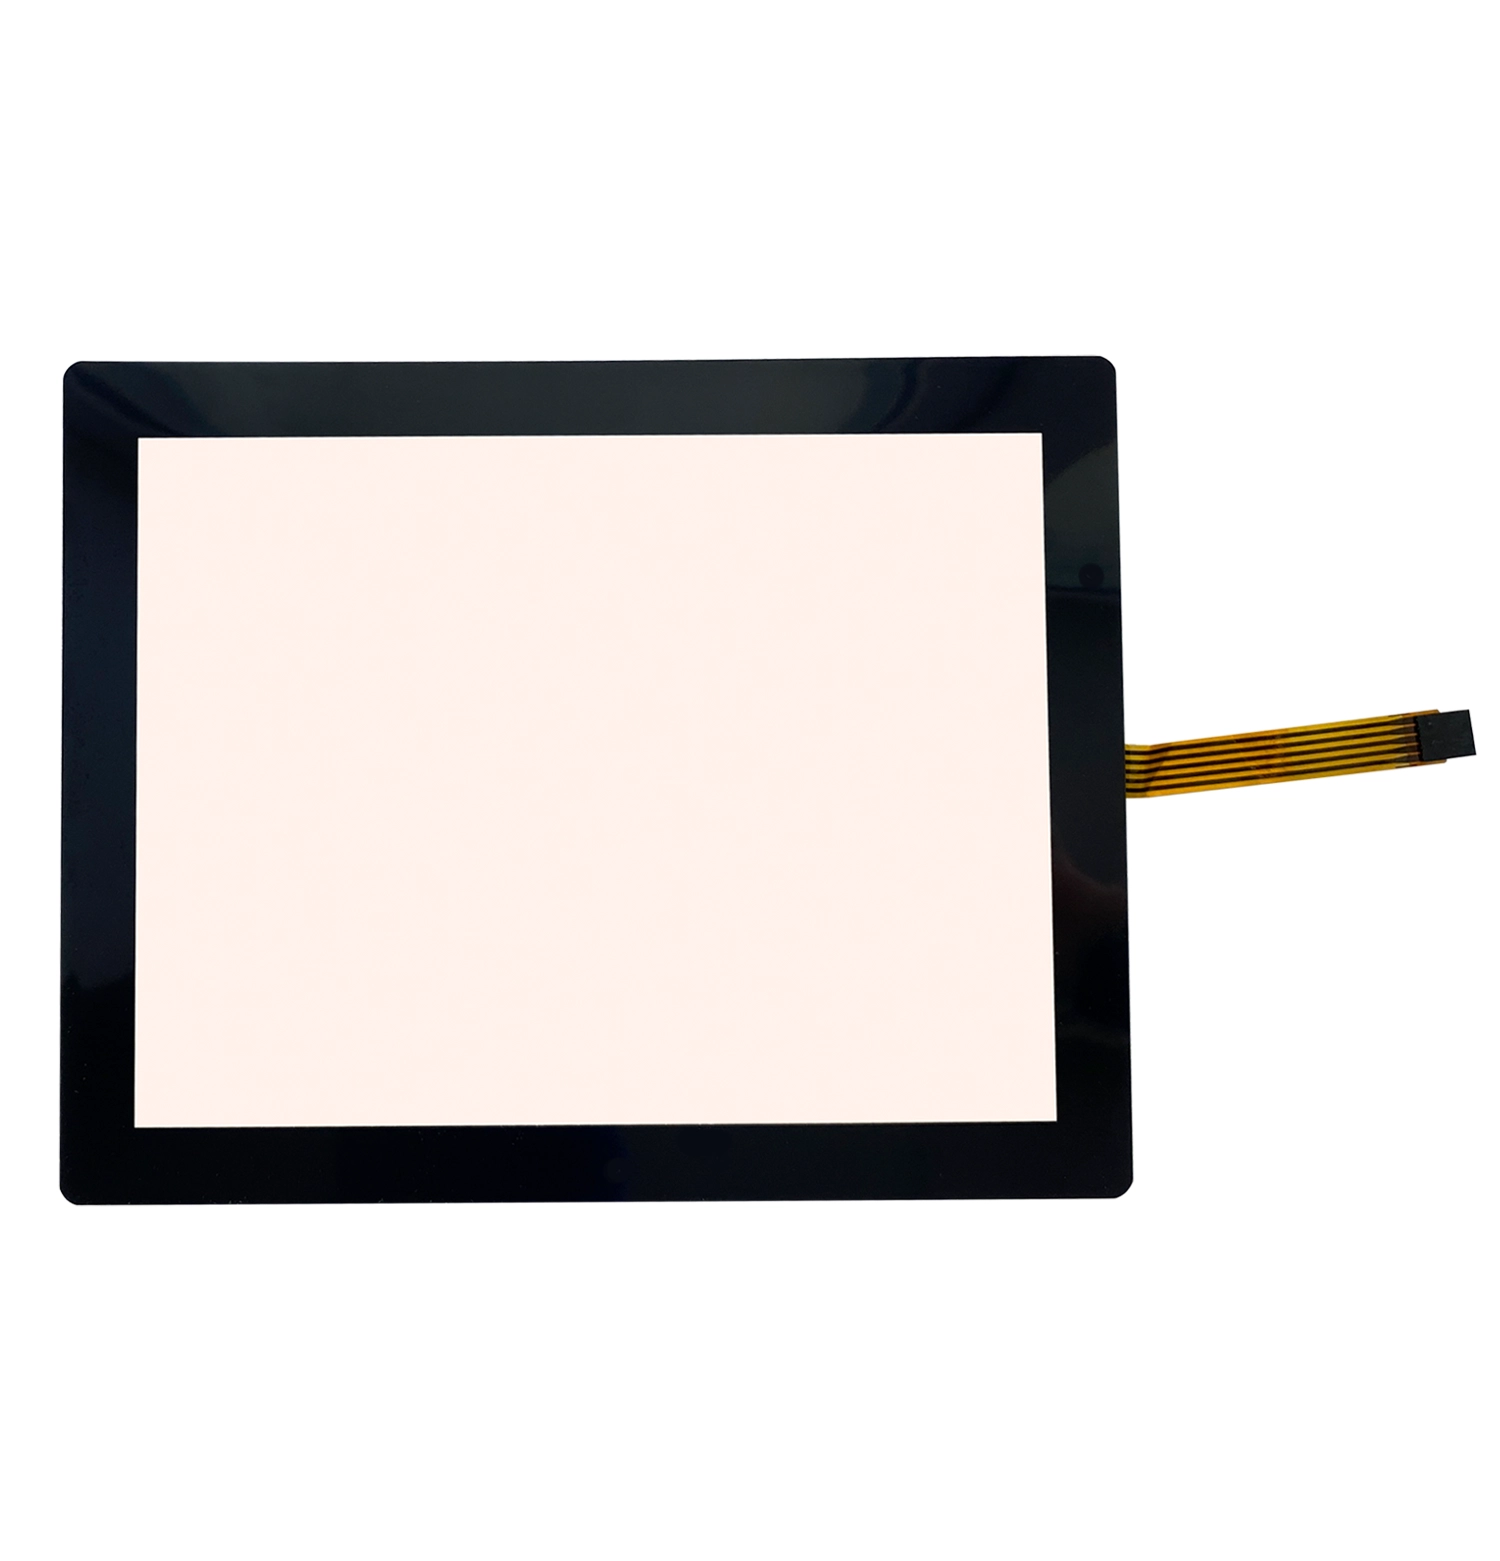 RESISTIVE TOUCH SCREEN KEETOUCH GMBH 12,1" KP-121-RP00052 NEO BLACK